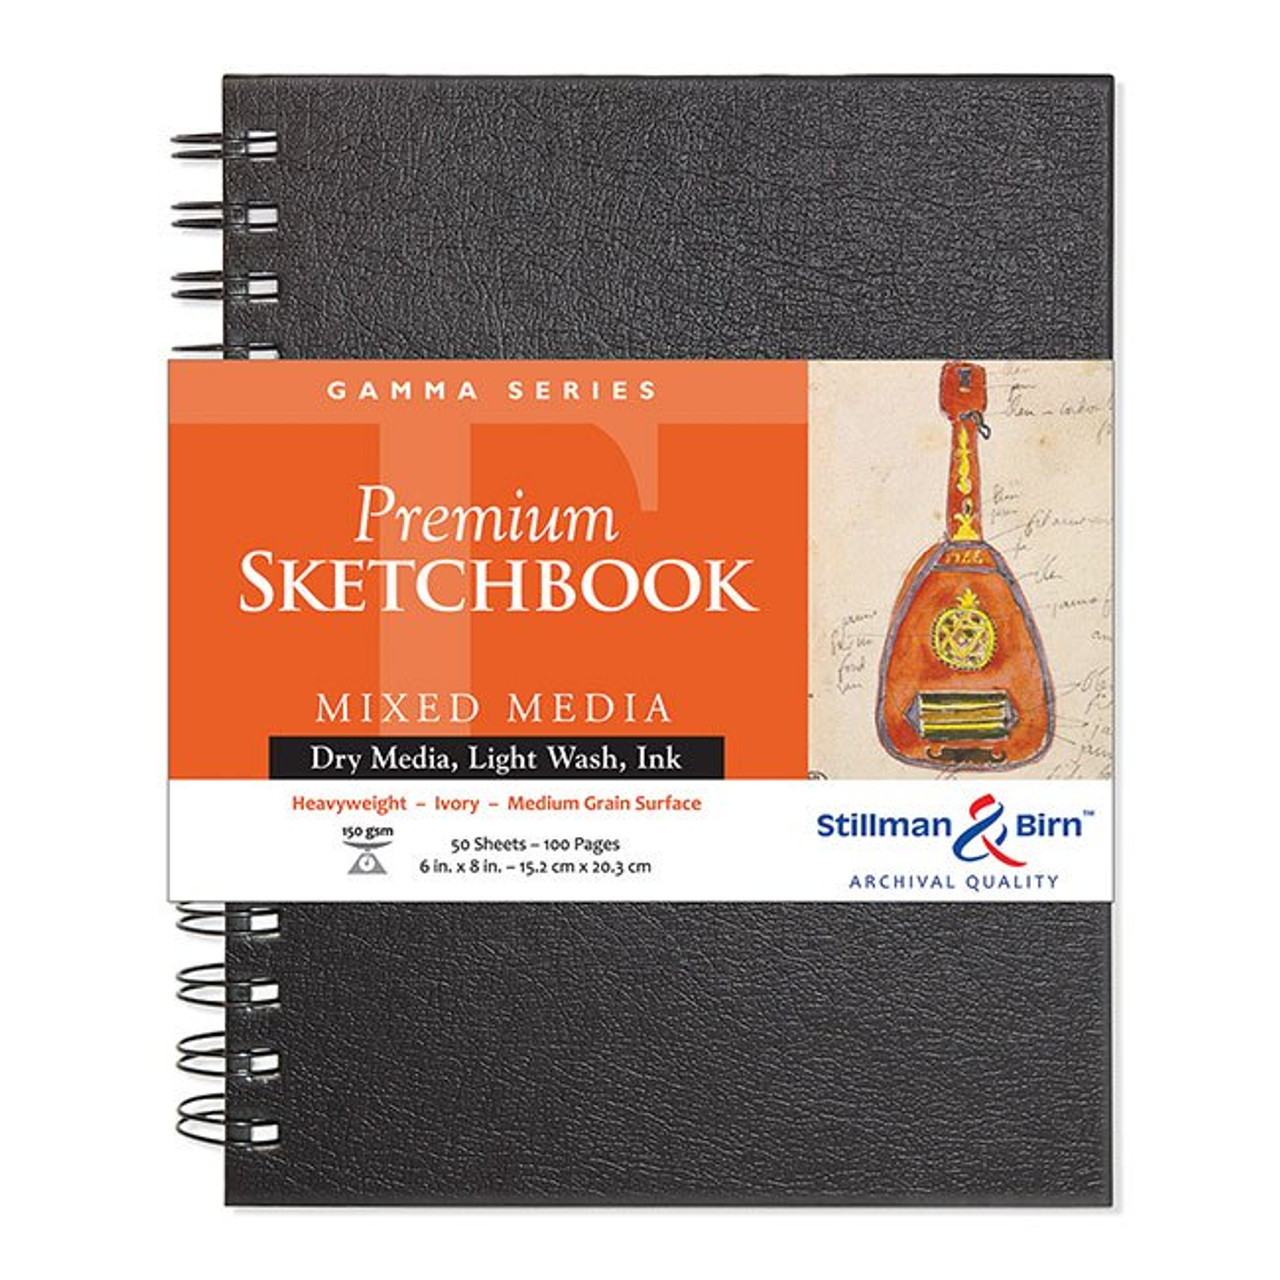 Choosing a Sketchbook - Strathmore Mixed Media, or Stillman and